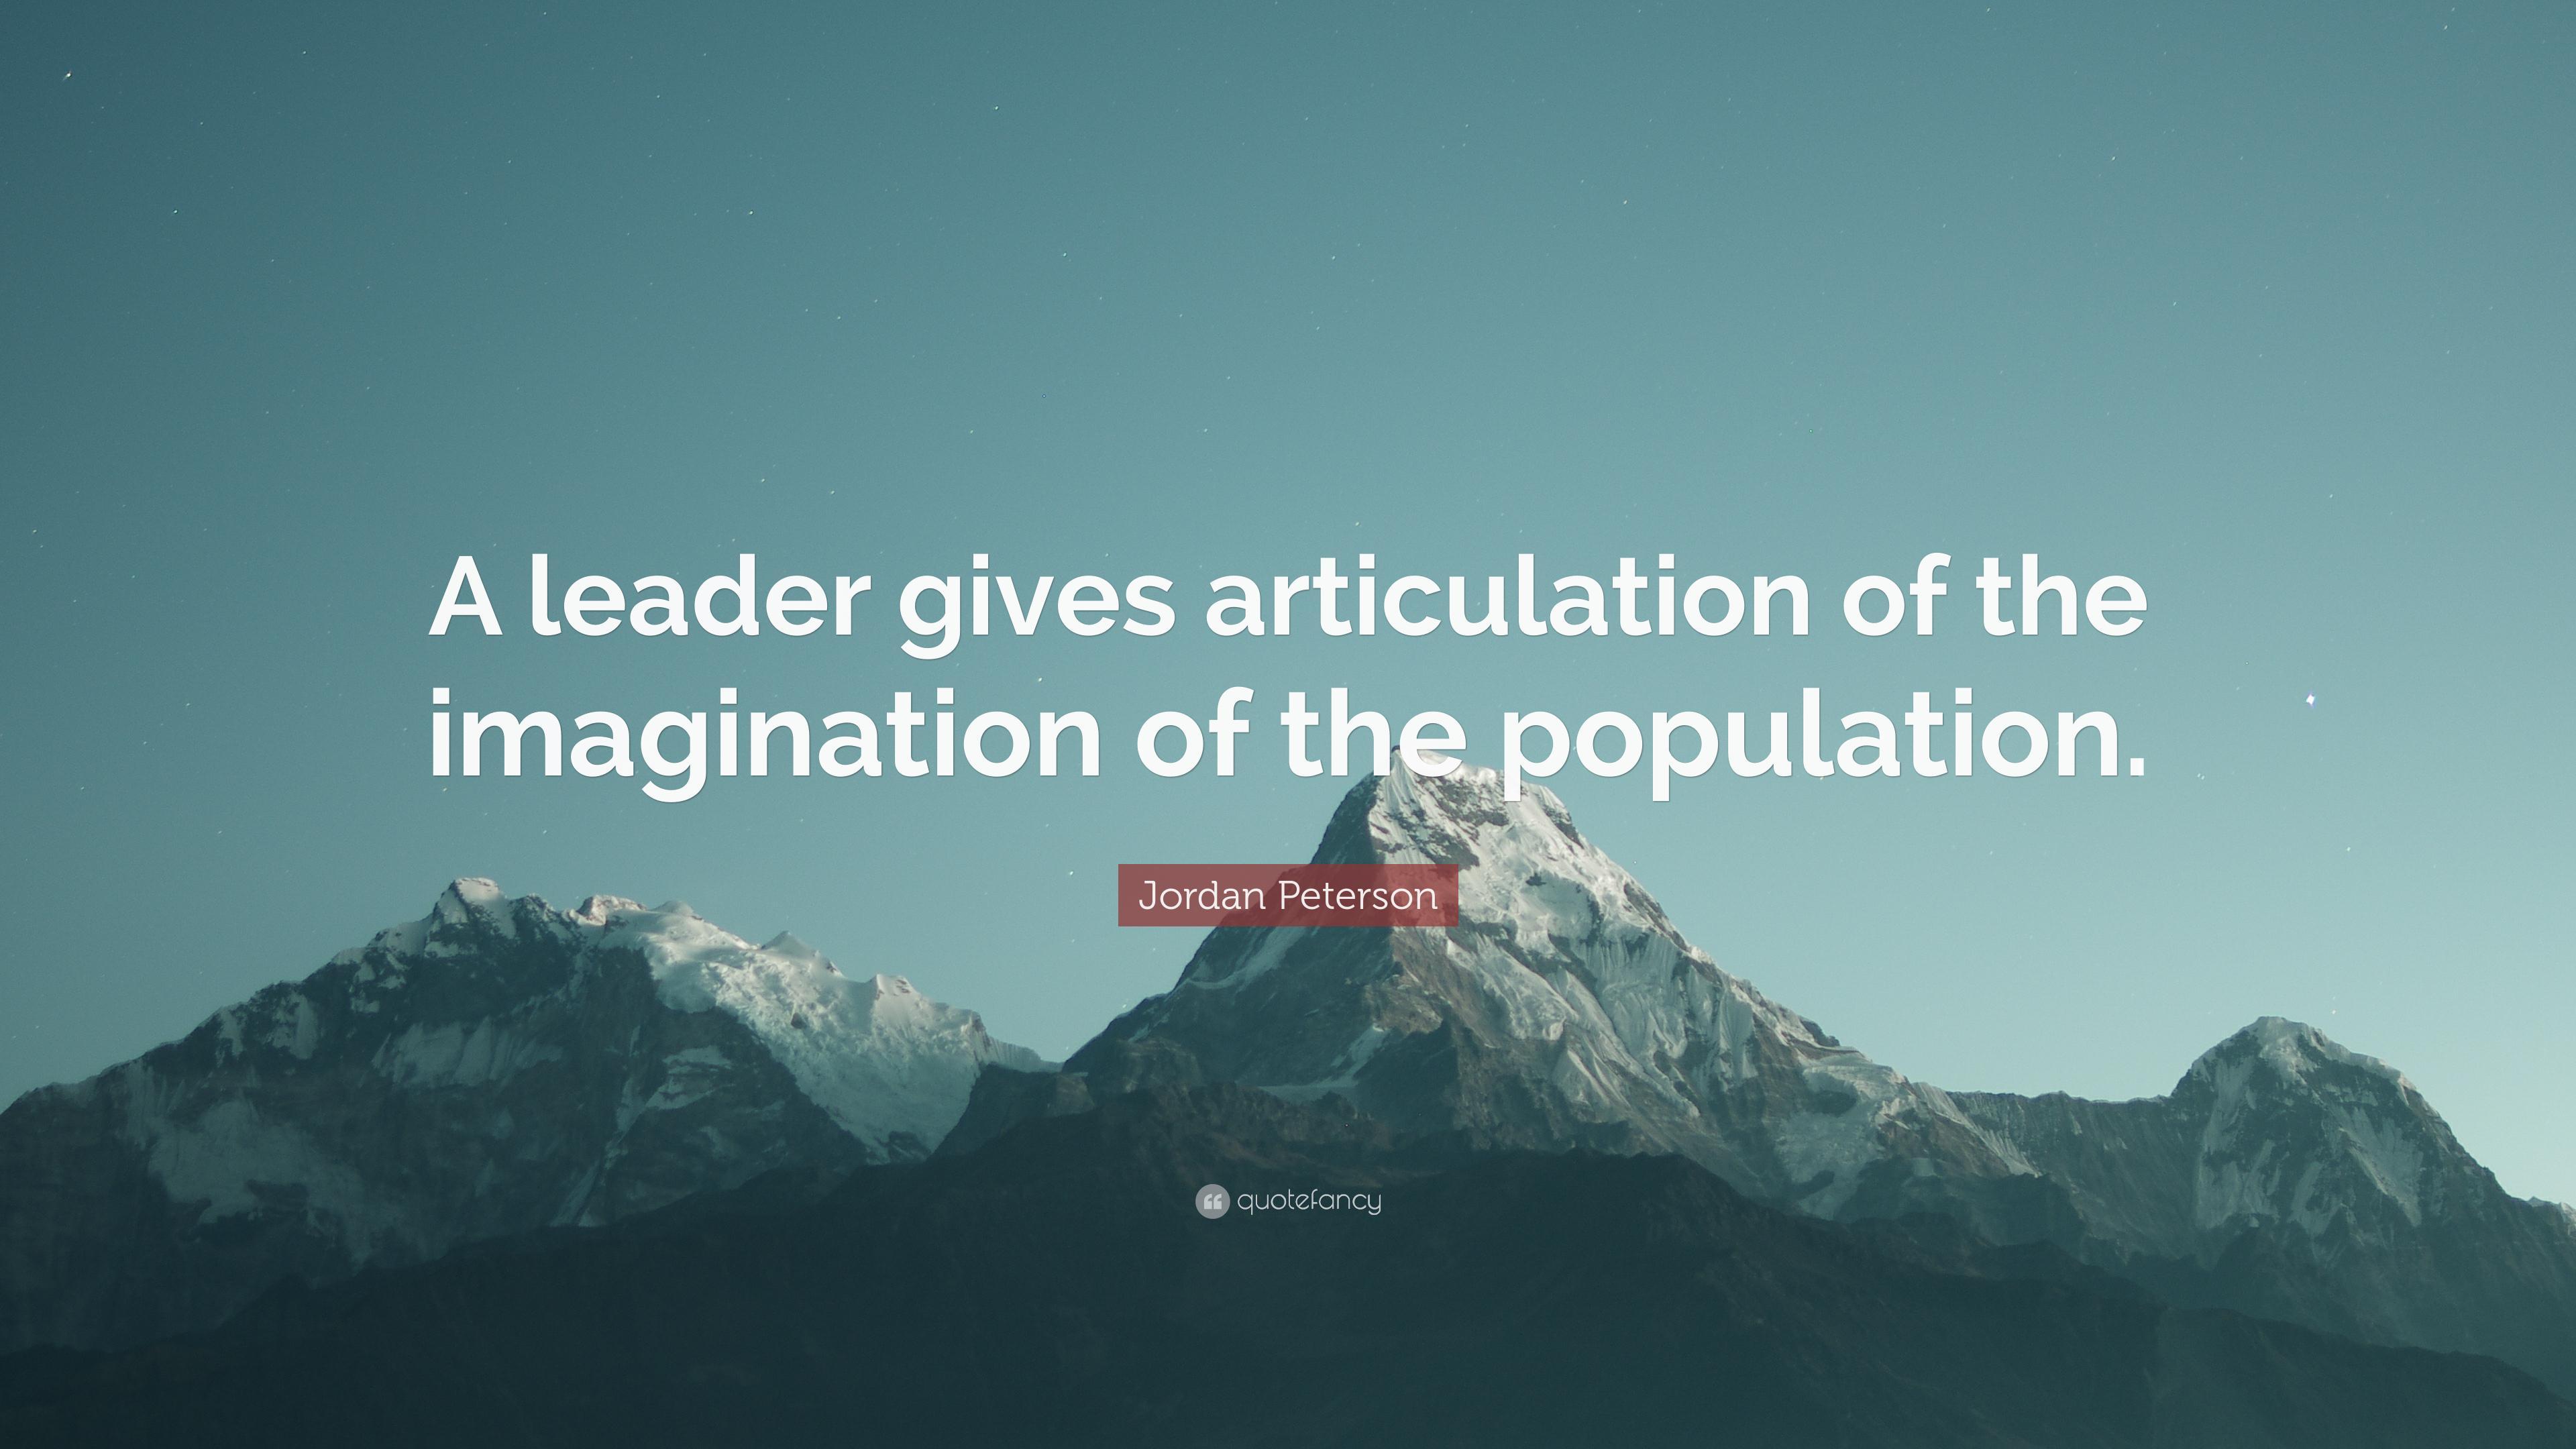 Jordan Peterson Quote: “A leader gives articulation